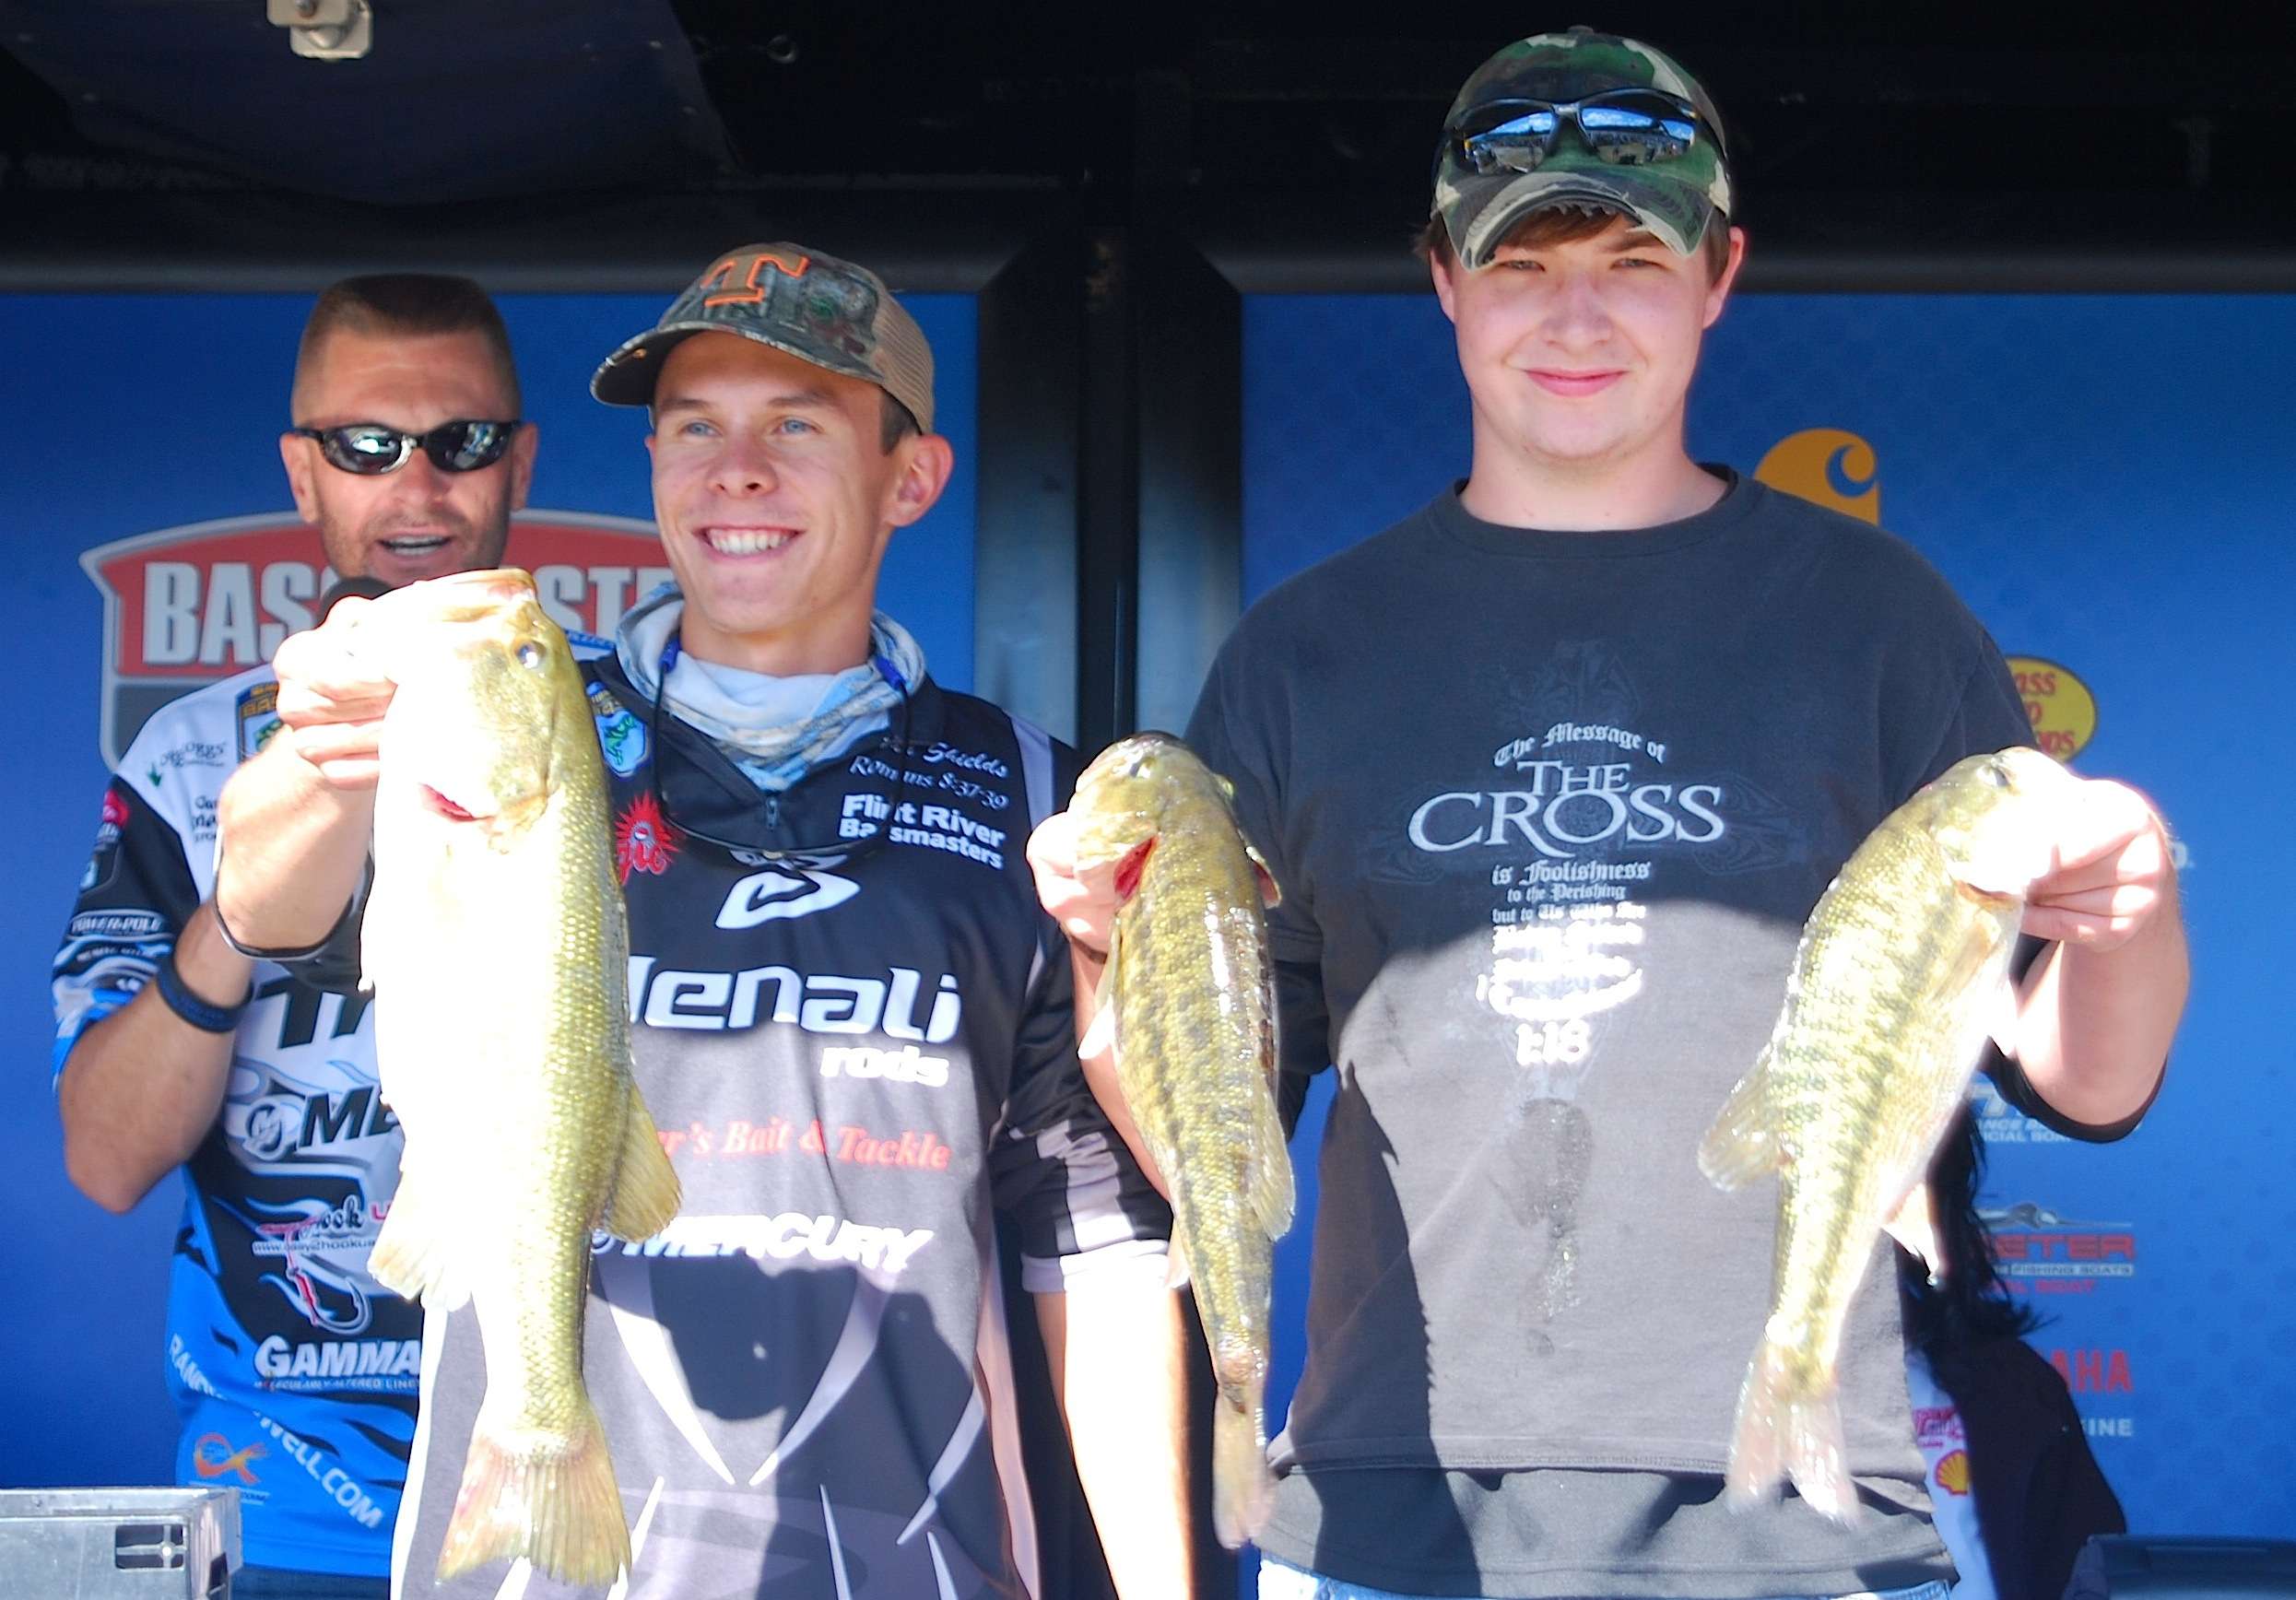 It looked like Ryan Shields and Austin Hale of Hazel Green was going to run away with 1st place after they showed off 14.37 pounds of bass. They finished 2nd.